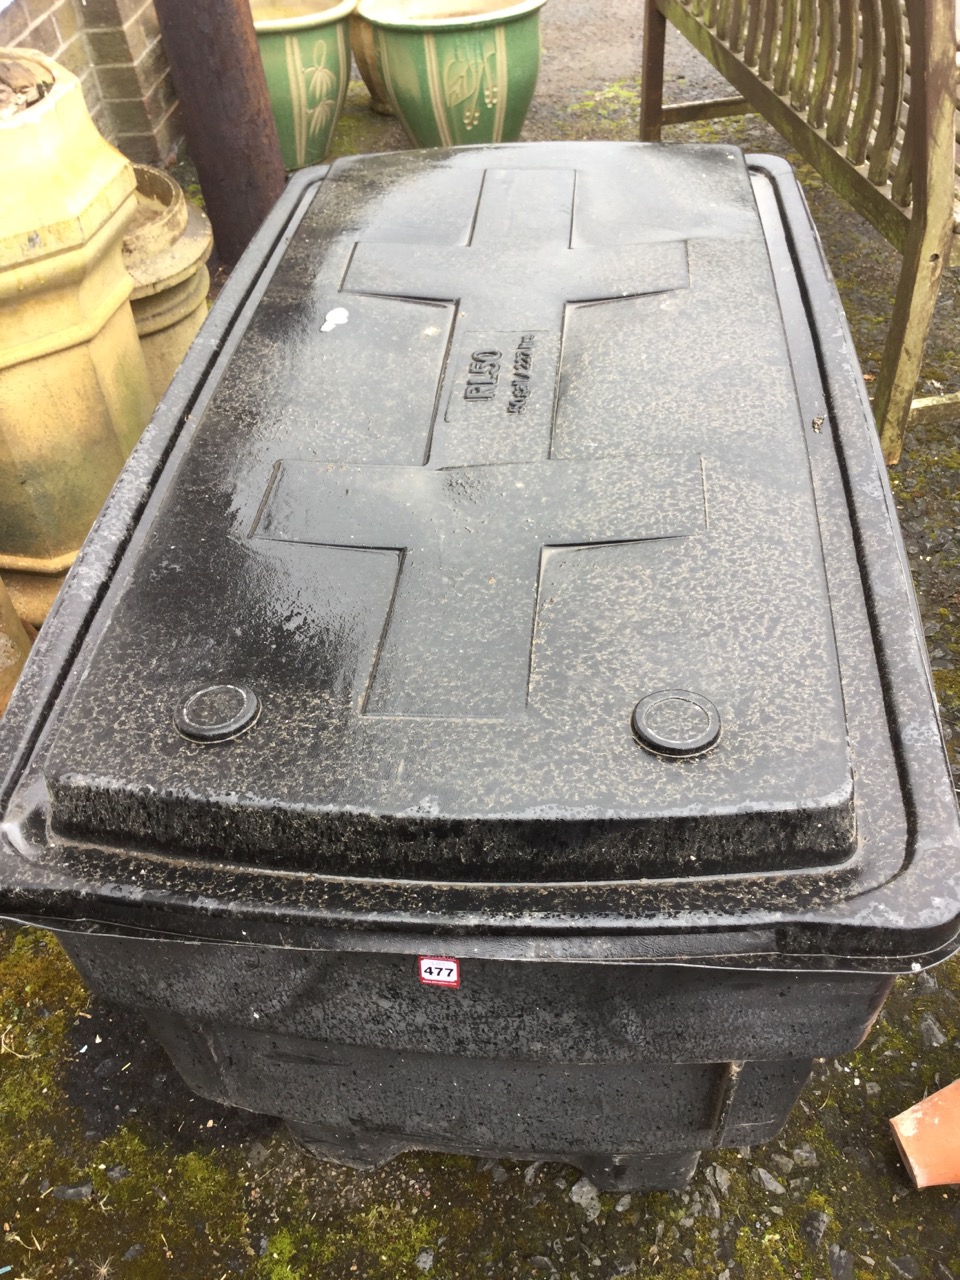 A 50 gal water tank & cover - unused and with full lagging insulation. (46in x 26in x 26in)